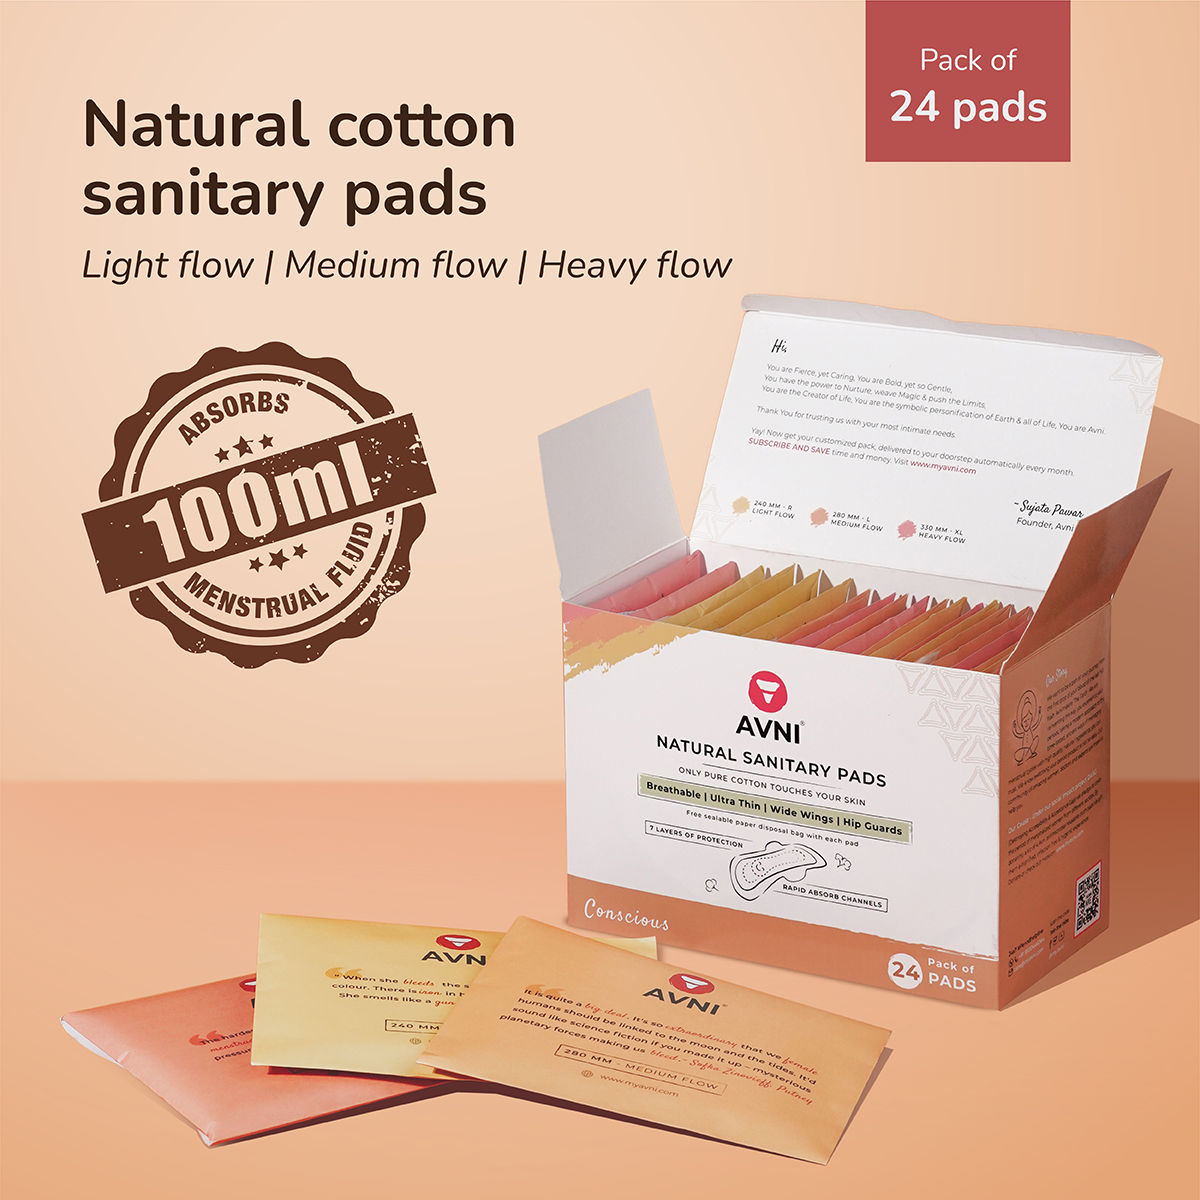 Natural Cotton Sanitary Pads - Value Pack of 24 Pads